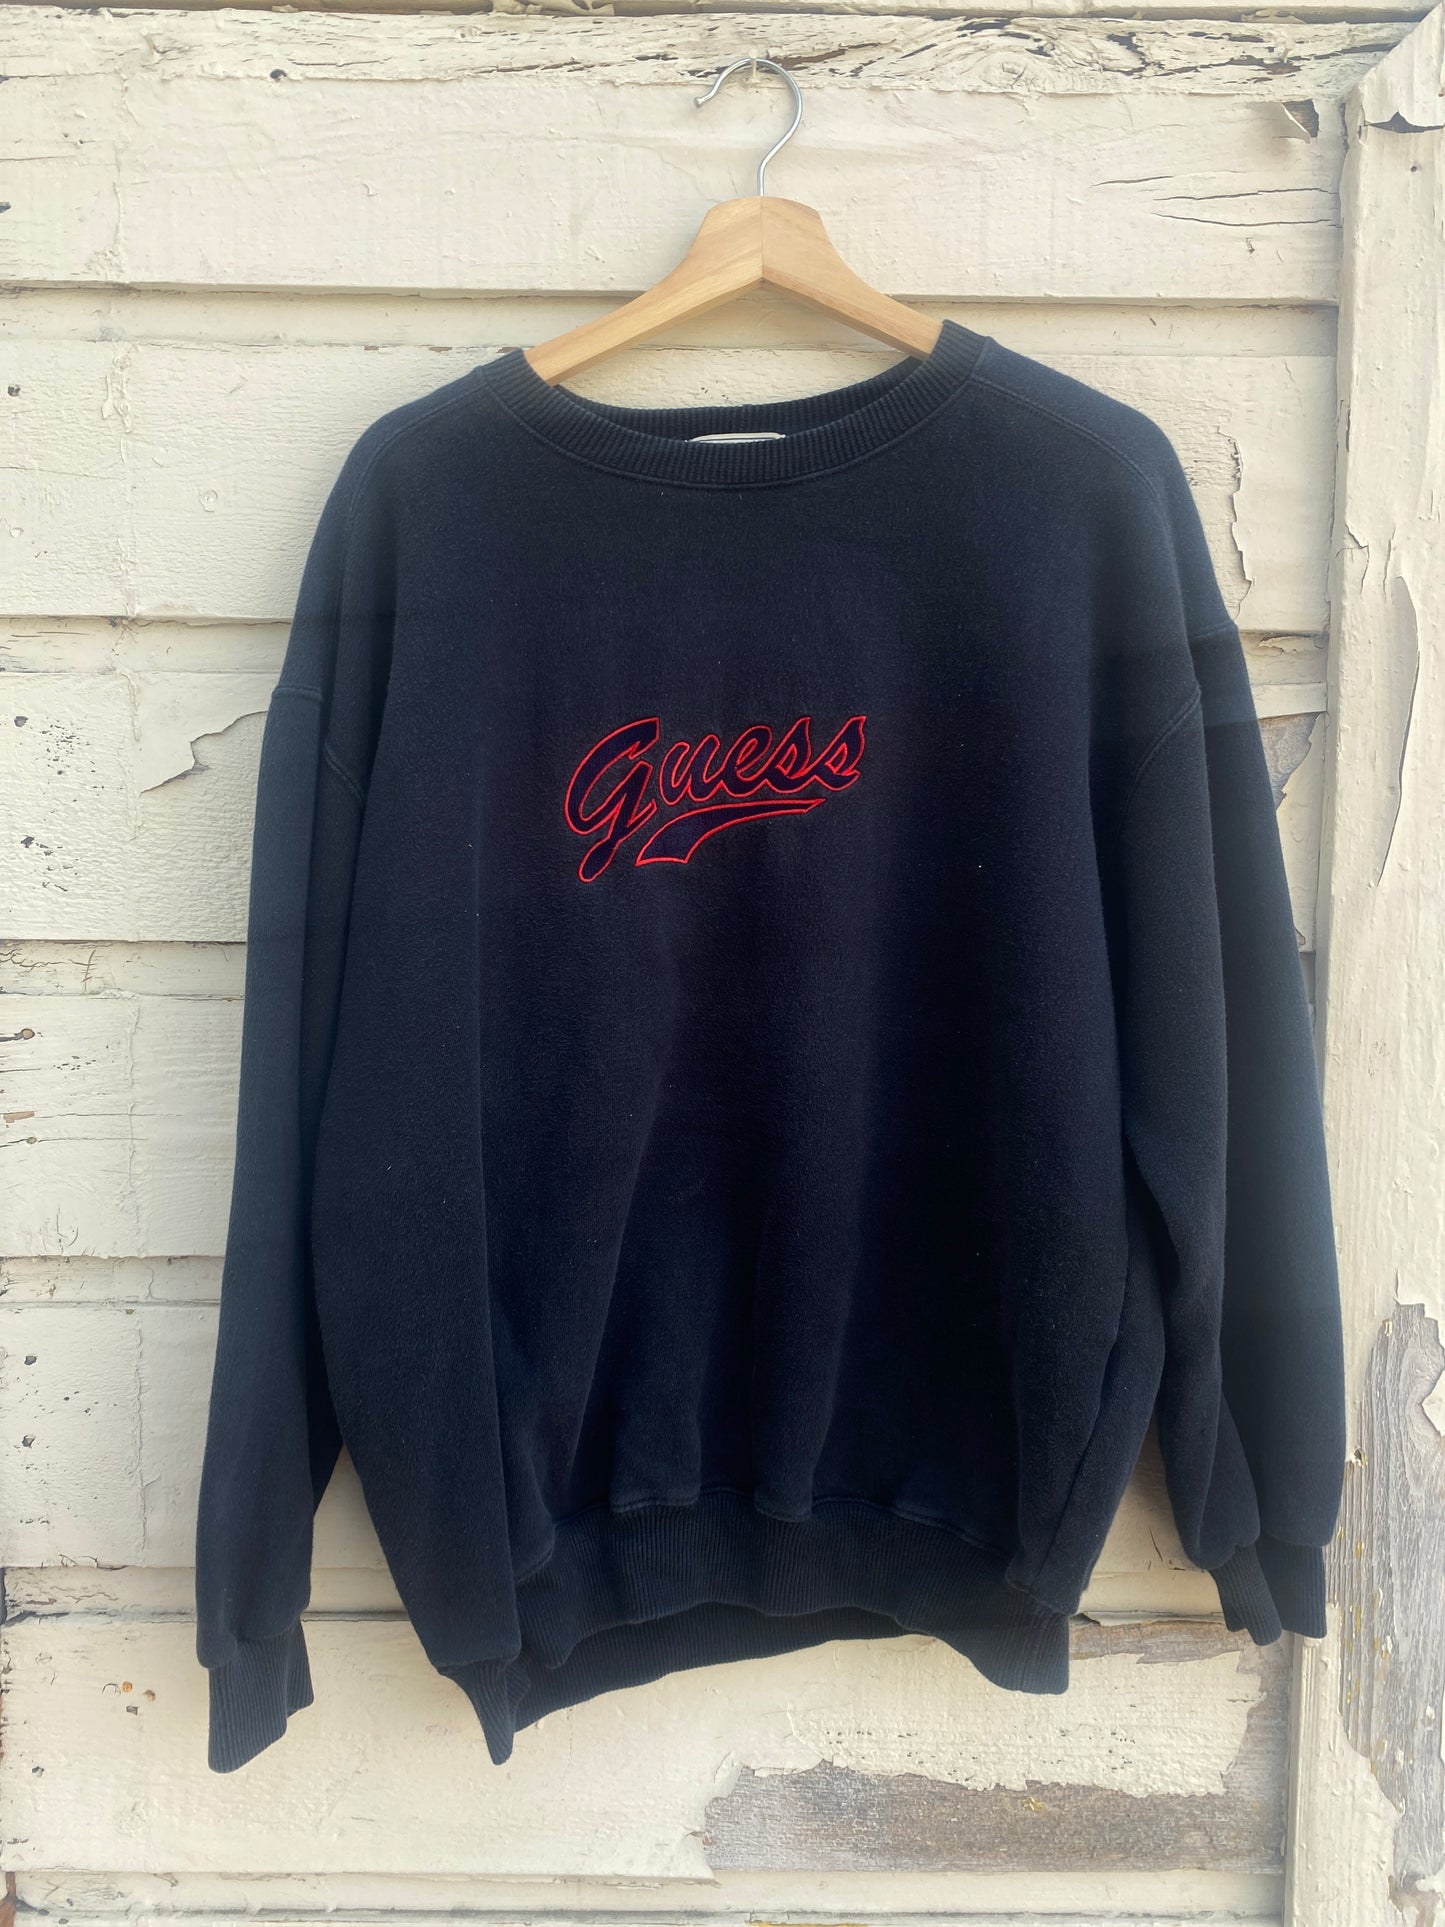 Vintage guess embroidered sweatshirt Large